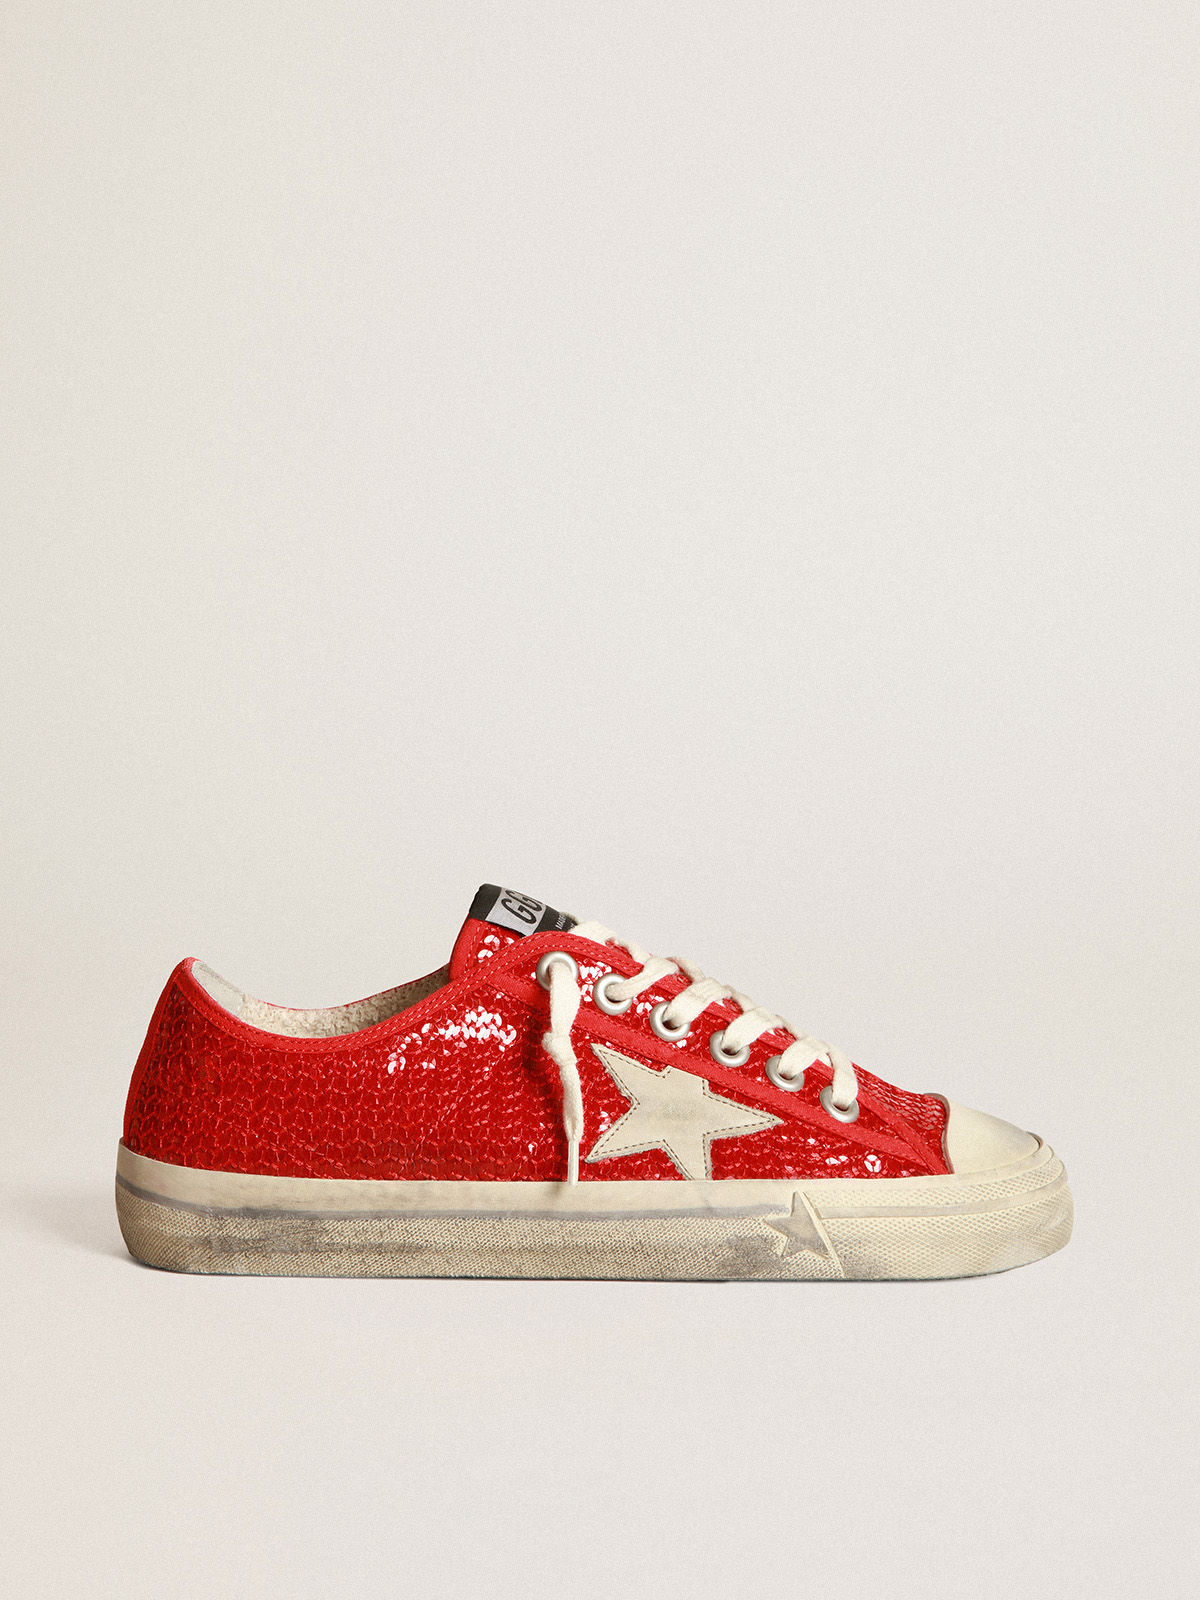 V-Star sneakers in red sequins with cream-colored leather star and red  grosgrain heel tab | Golden Goose